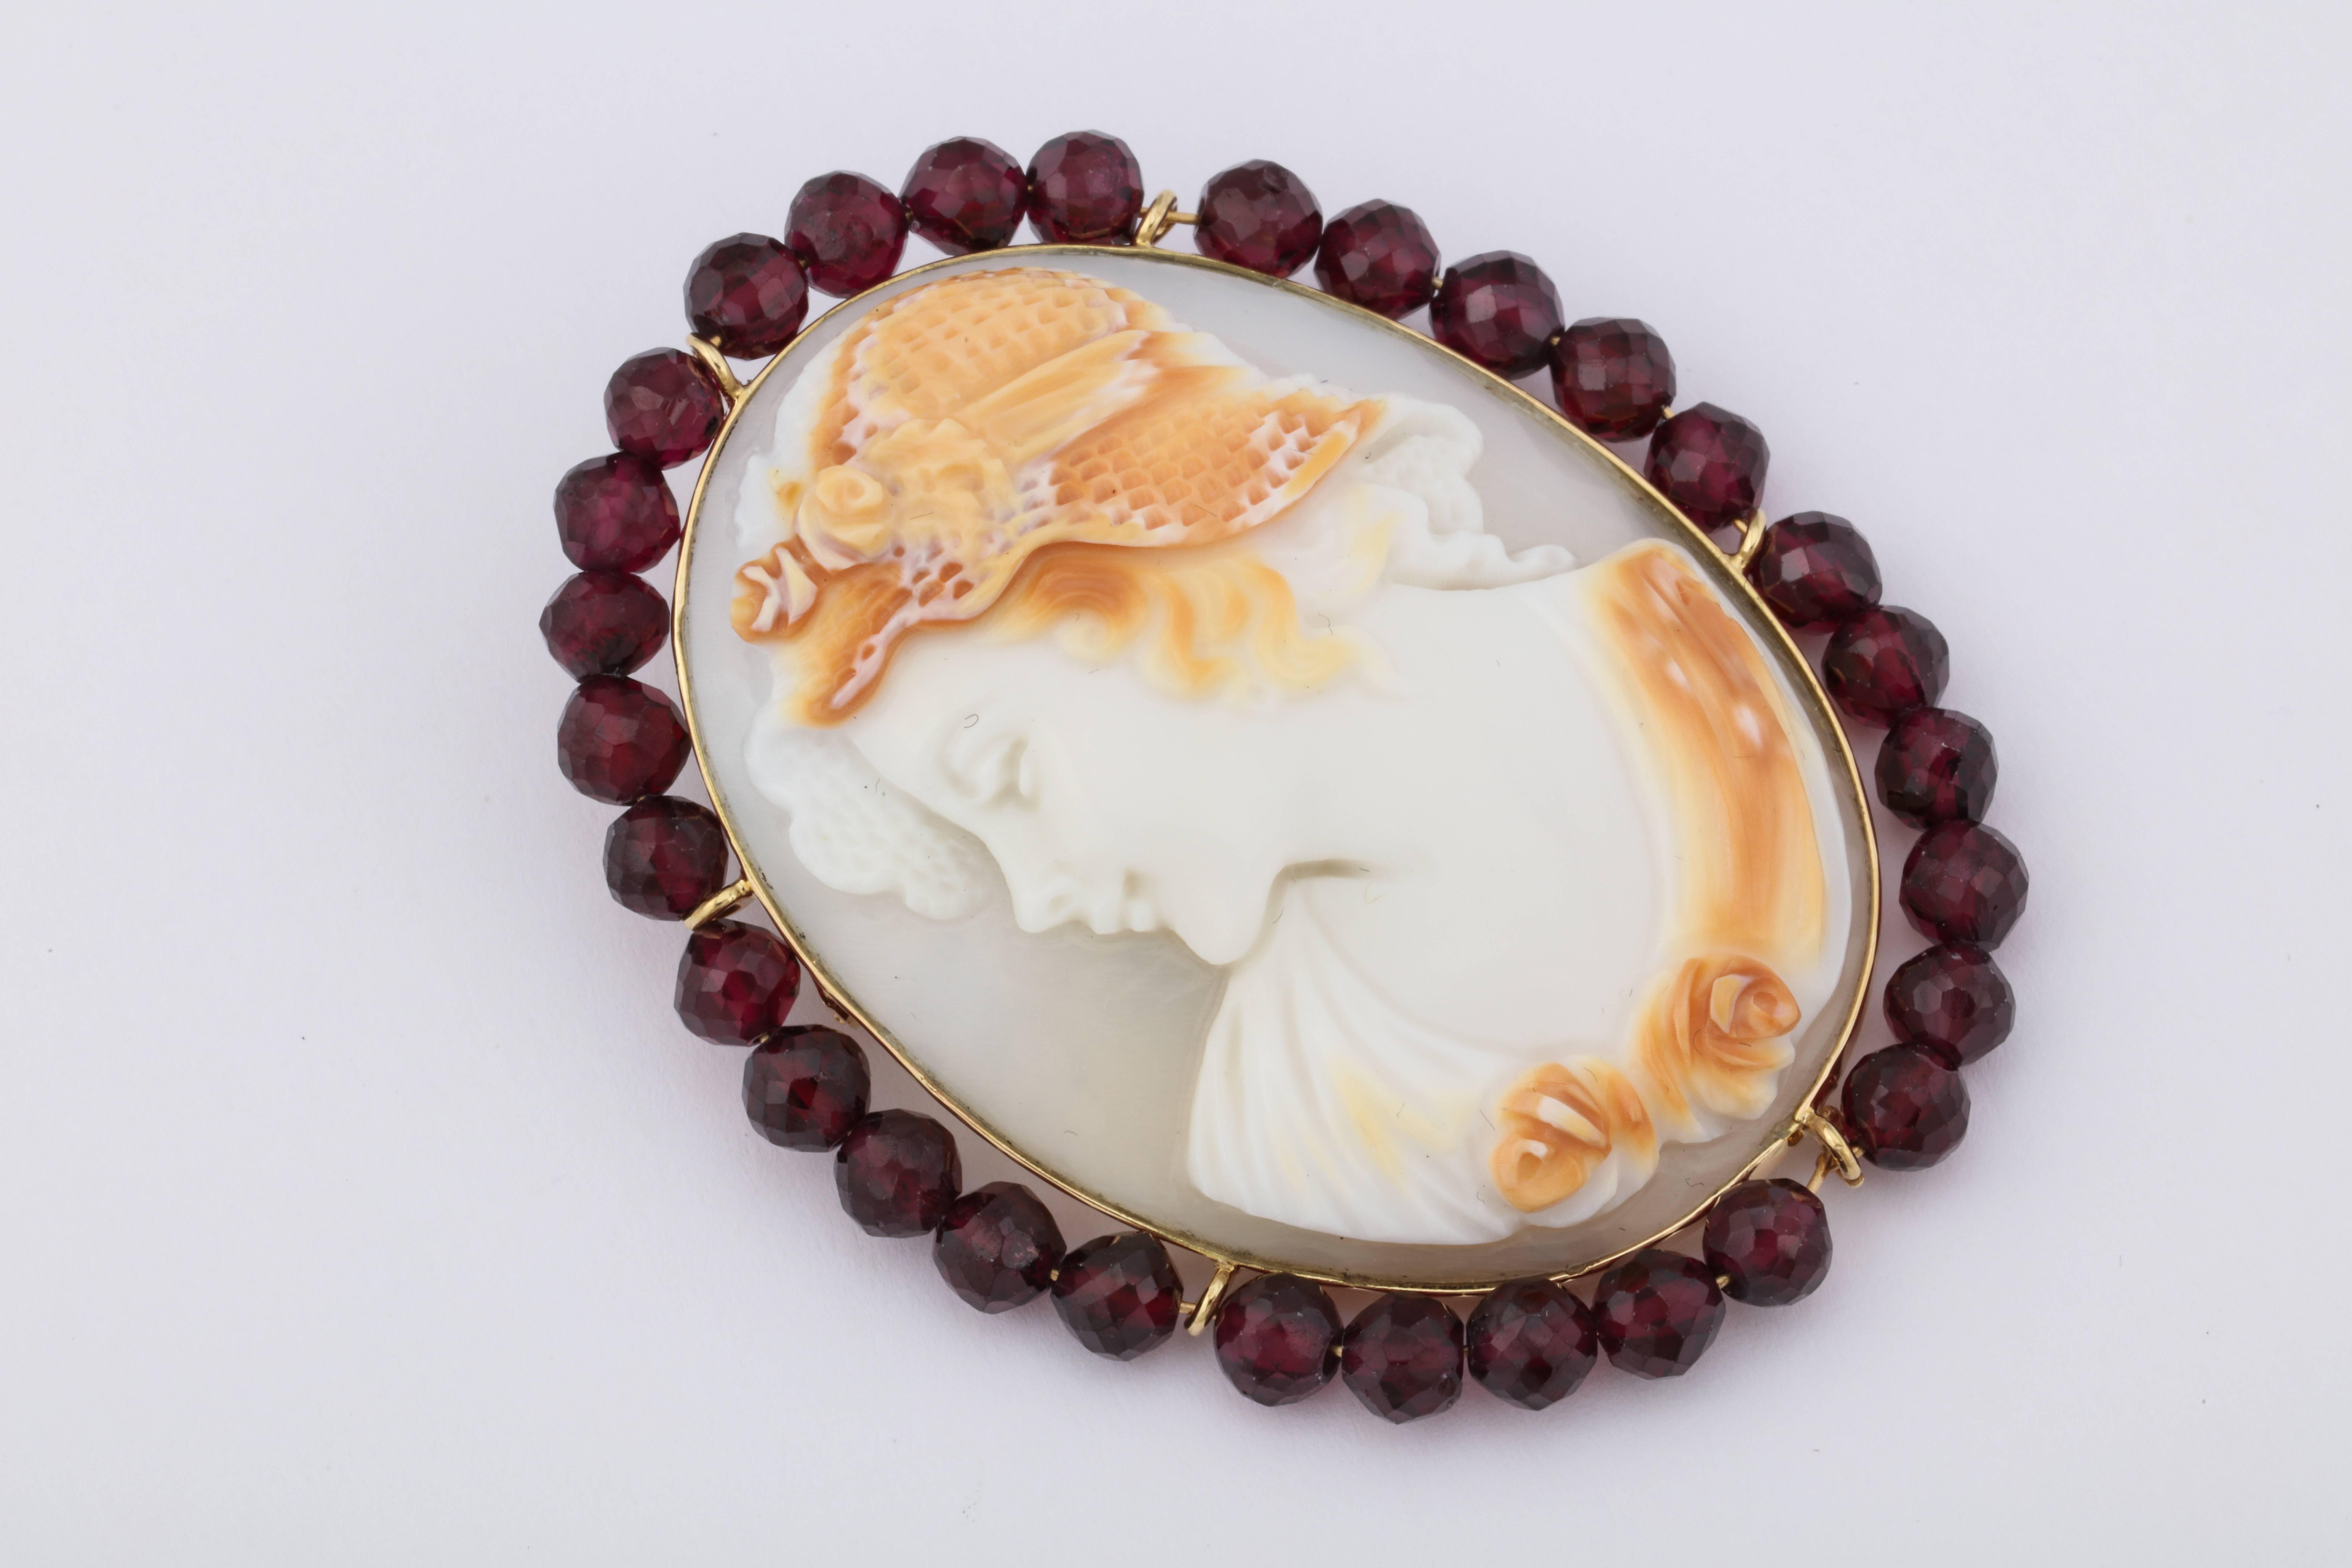 Hand carved cornelian cameo set in 14kt gold pin/pendant surrounded by garnet beads.